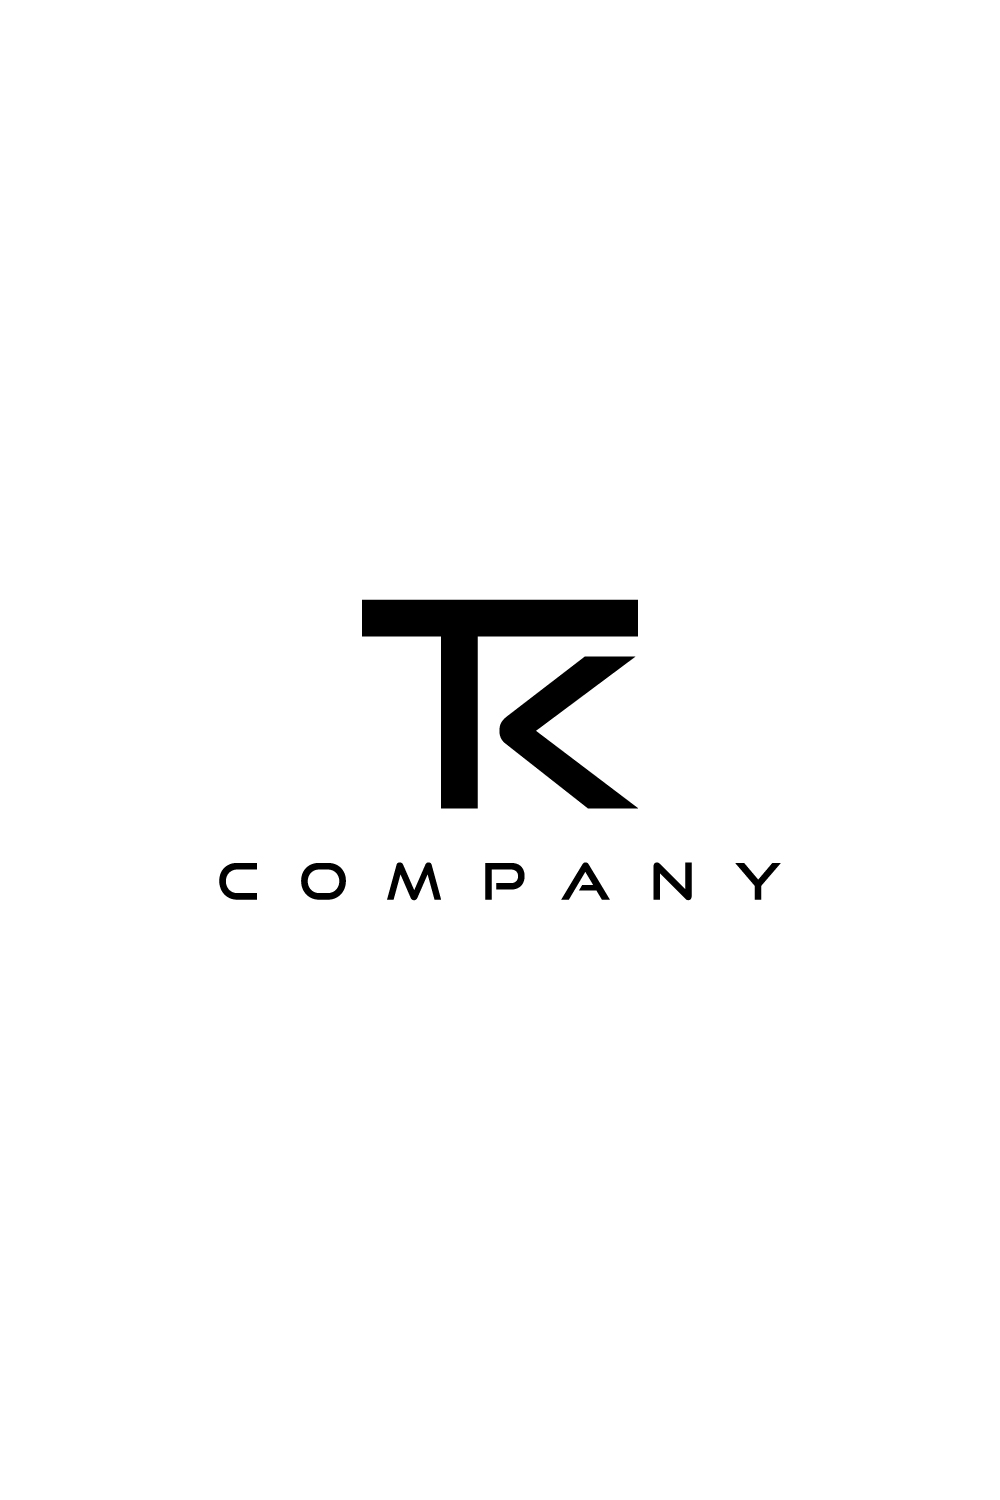 TK letter mark logo with a modern look pinterest preview image.